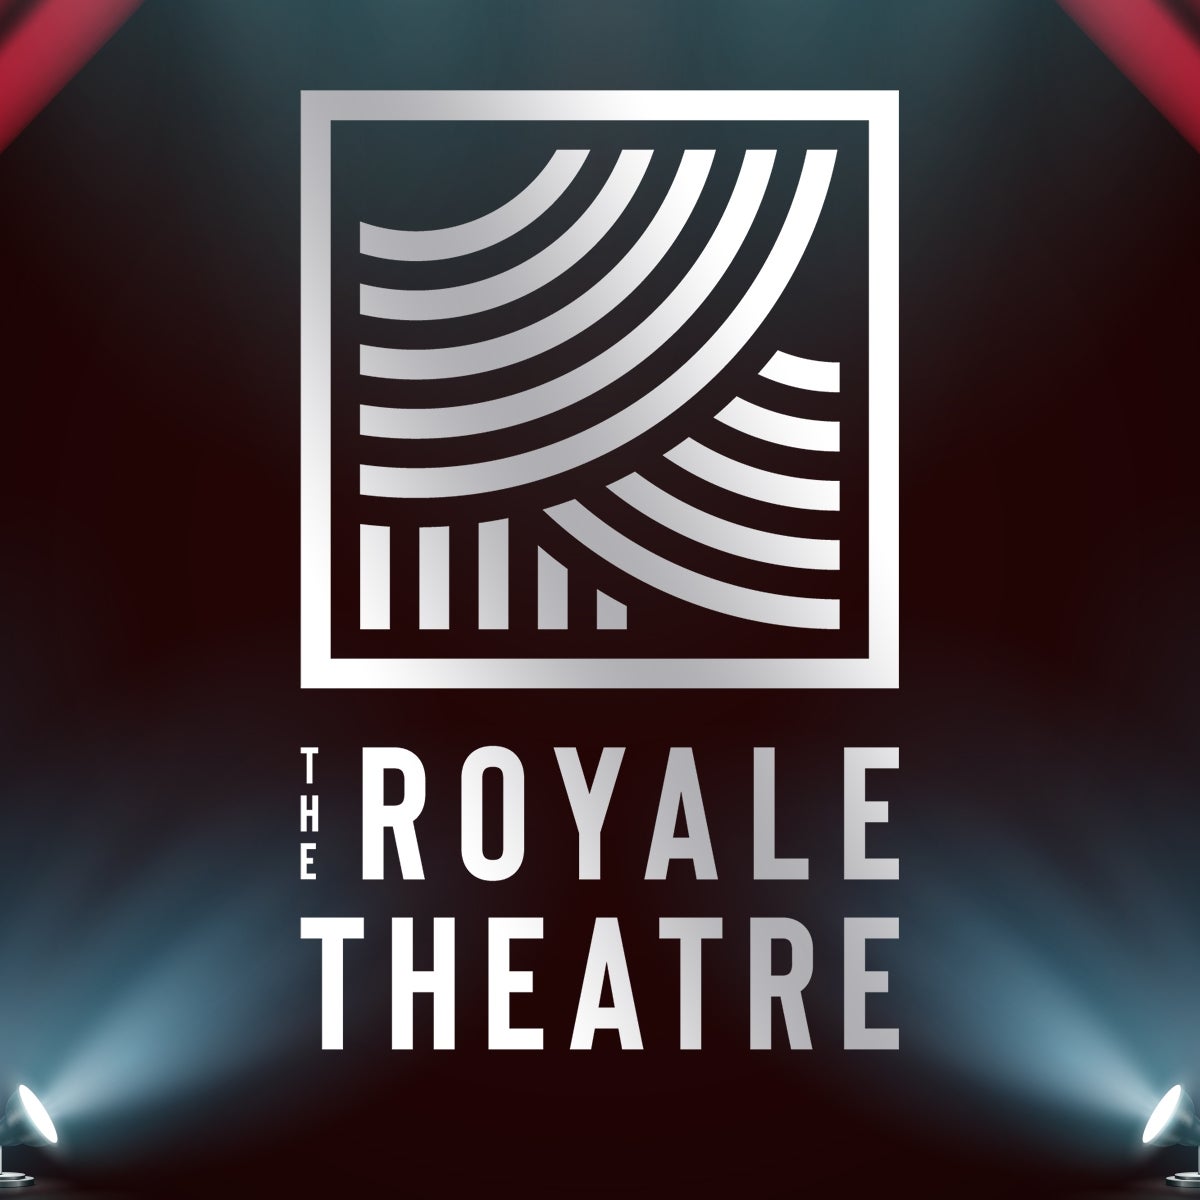 The Royale Theatre at Planet Royale